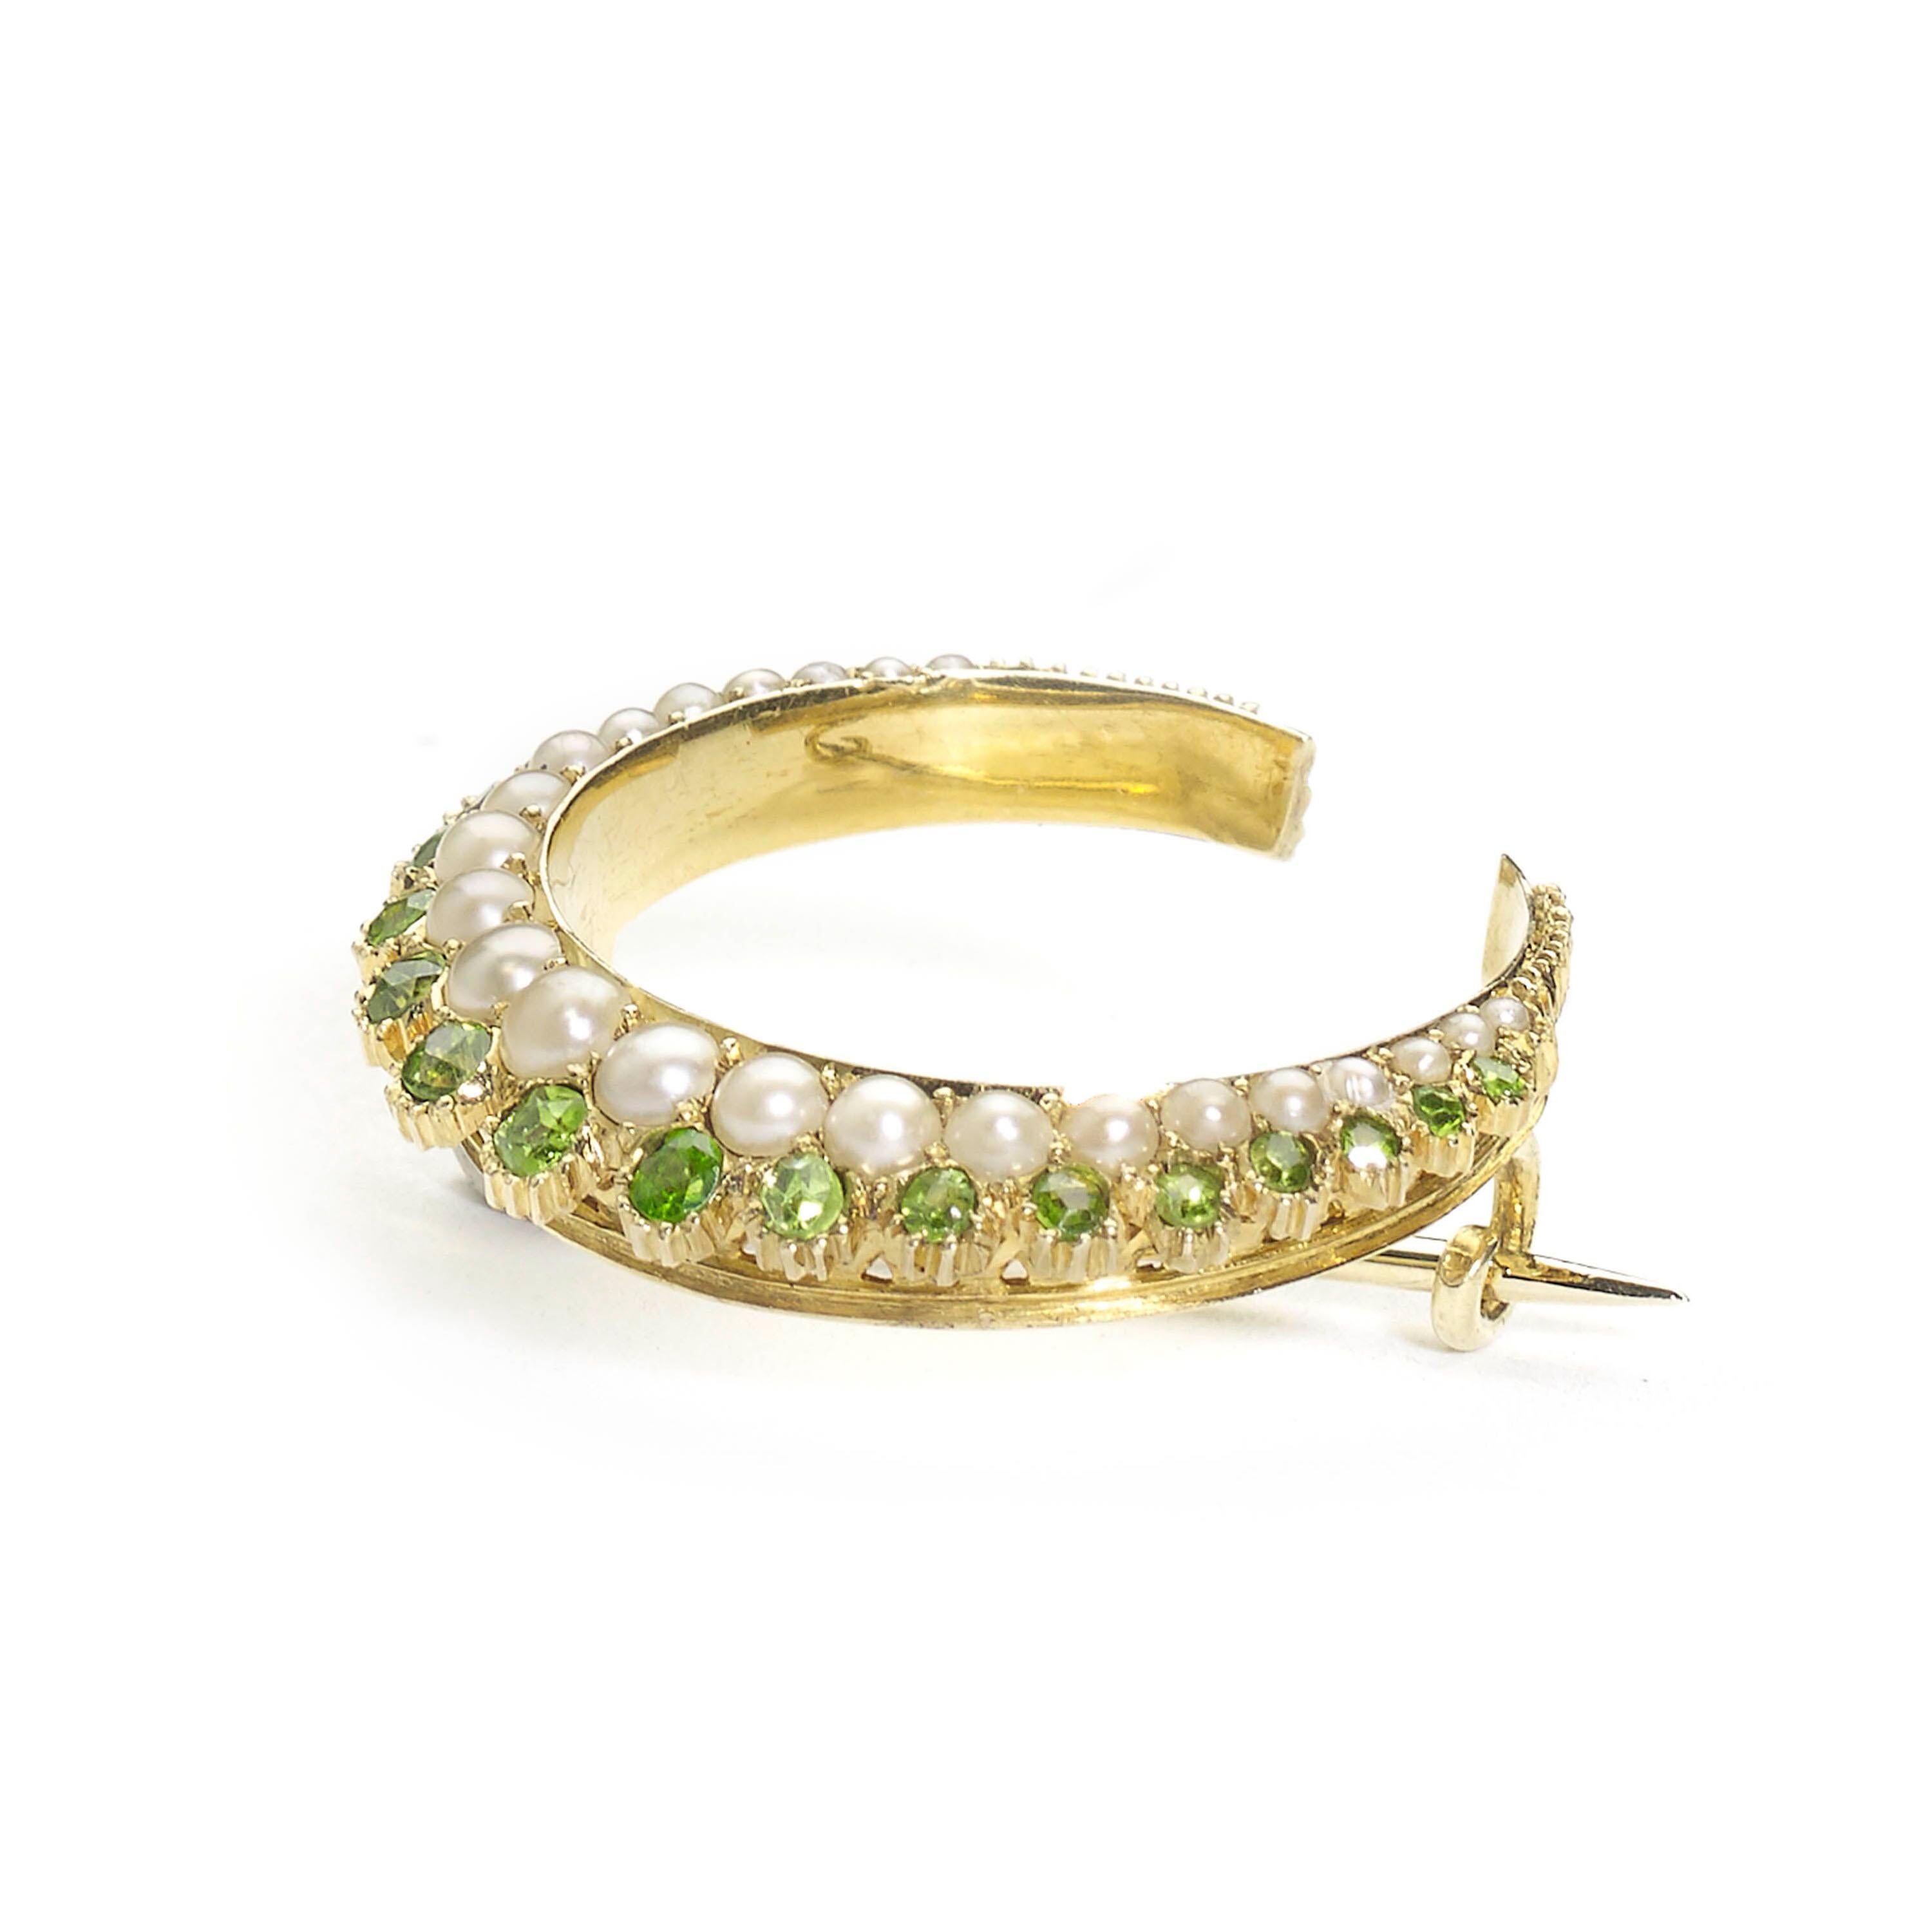 A Victorian demantoid garnet and pearl crescent brooch, designed as two rows, with an inner graduated row of half pearls and an outer graduated row of round-cut demantoid garnets, with a flat inner edge and a pierced outer gallery mounted in 15ct